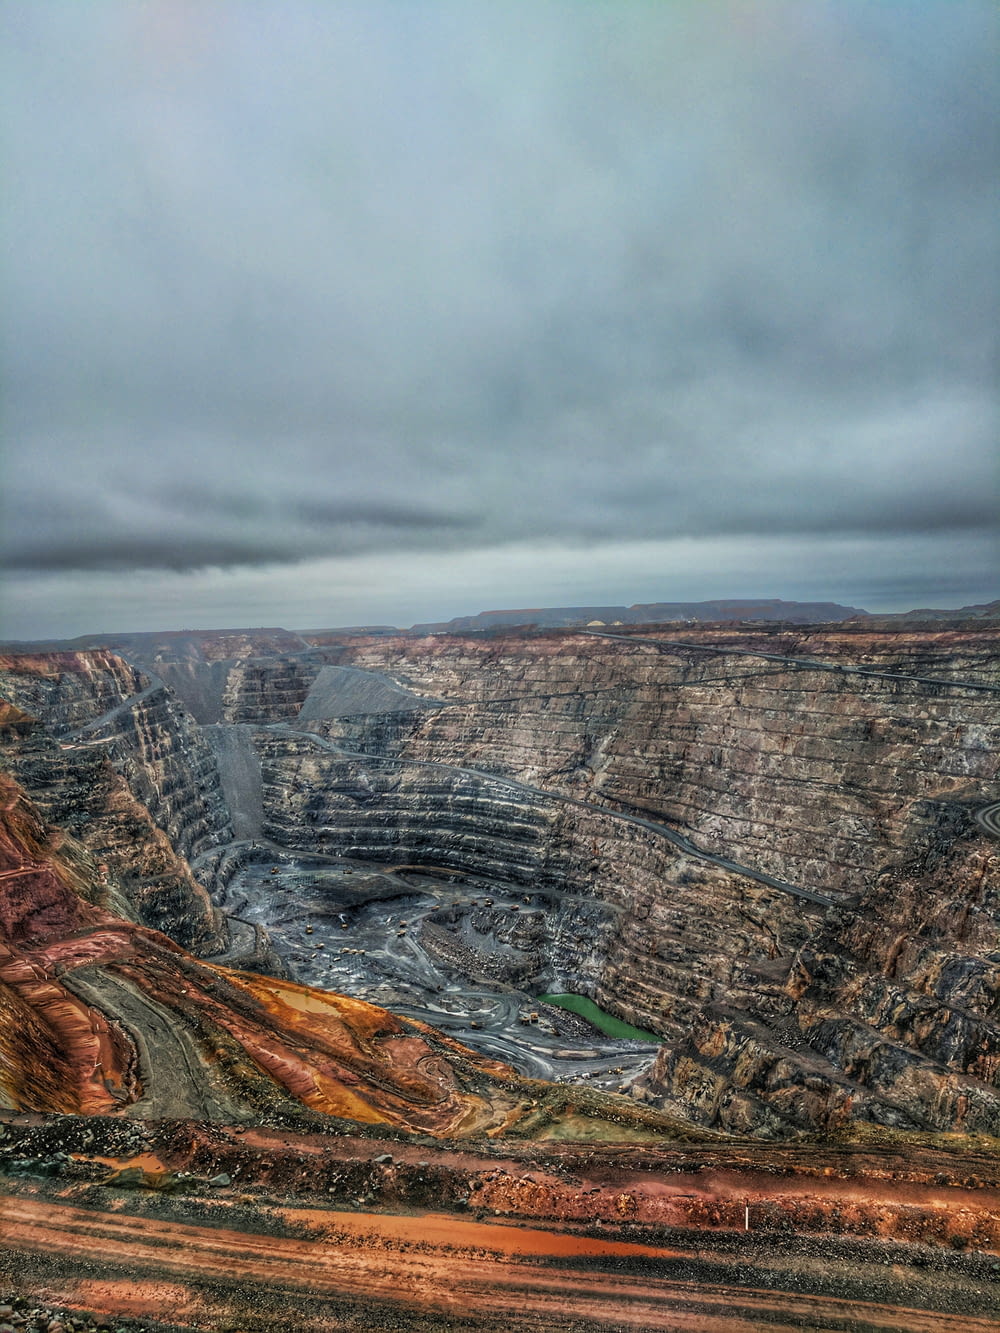 a view of a large open pit in the middle of nowhere